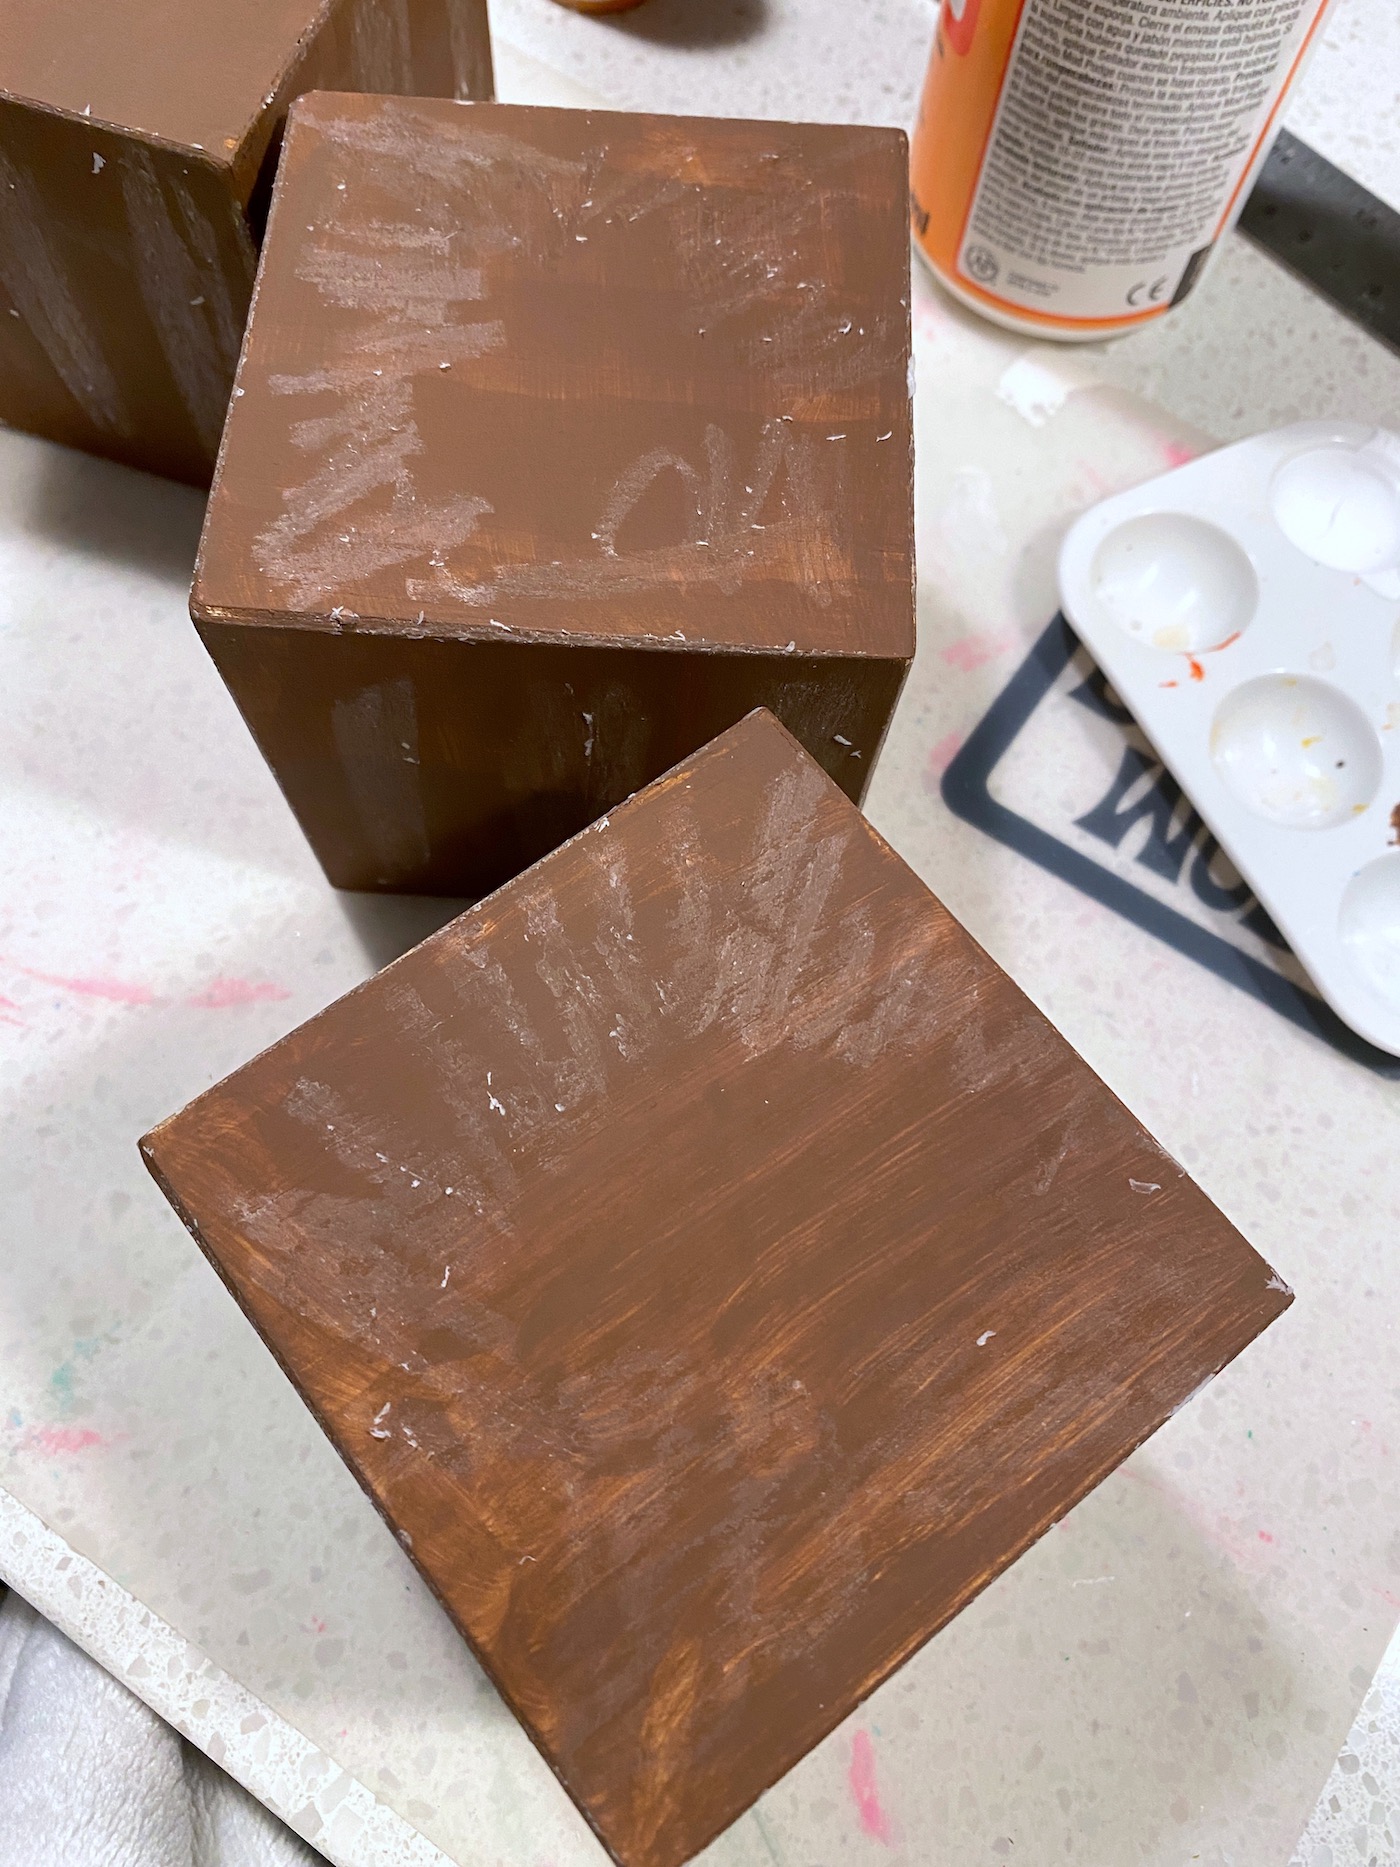 Wax rubbed onto the painted brown wood blocks